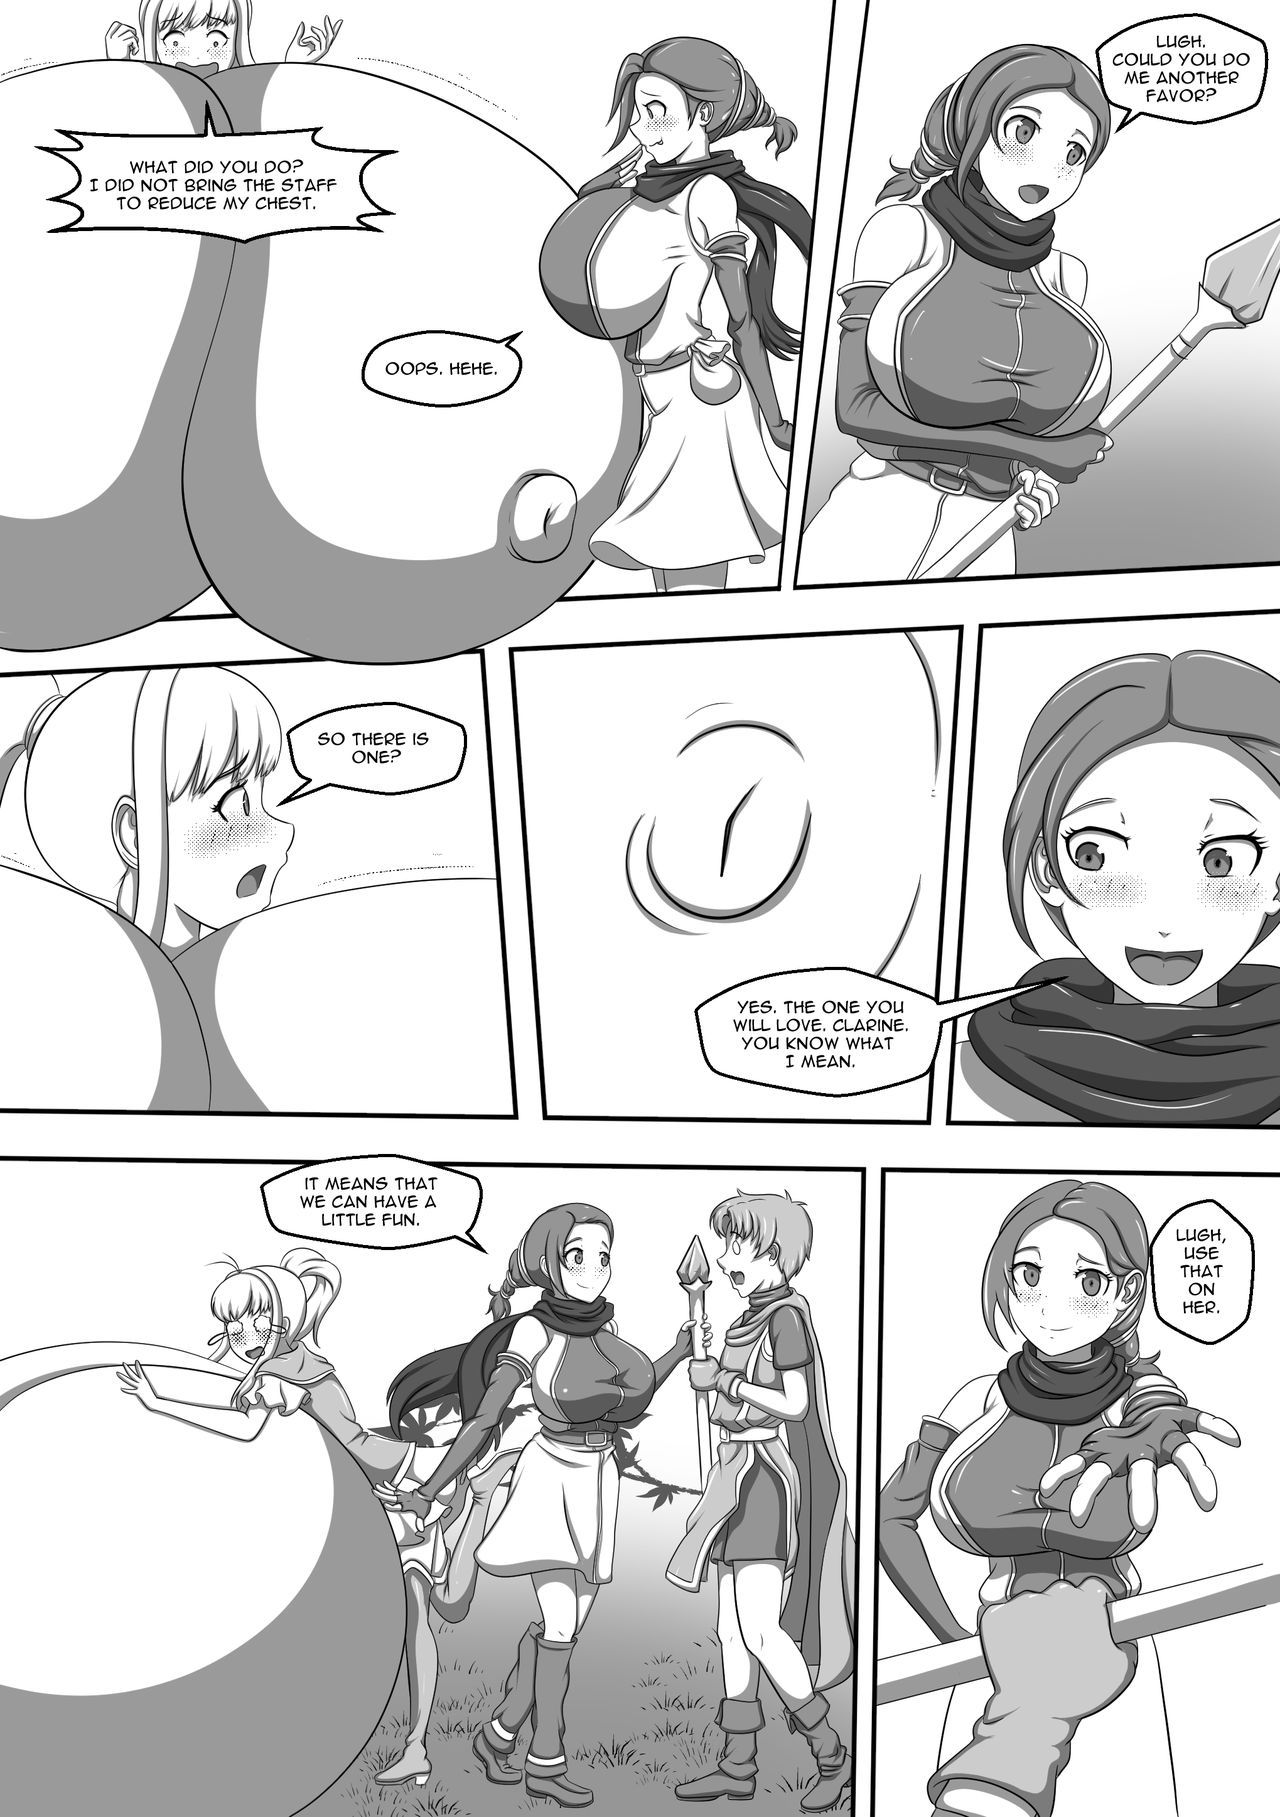 [EscapefromExpansion] Fire Emblem: The Binding Boobs [Ongoing] 4